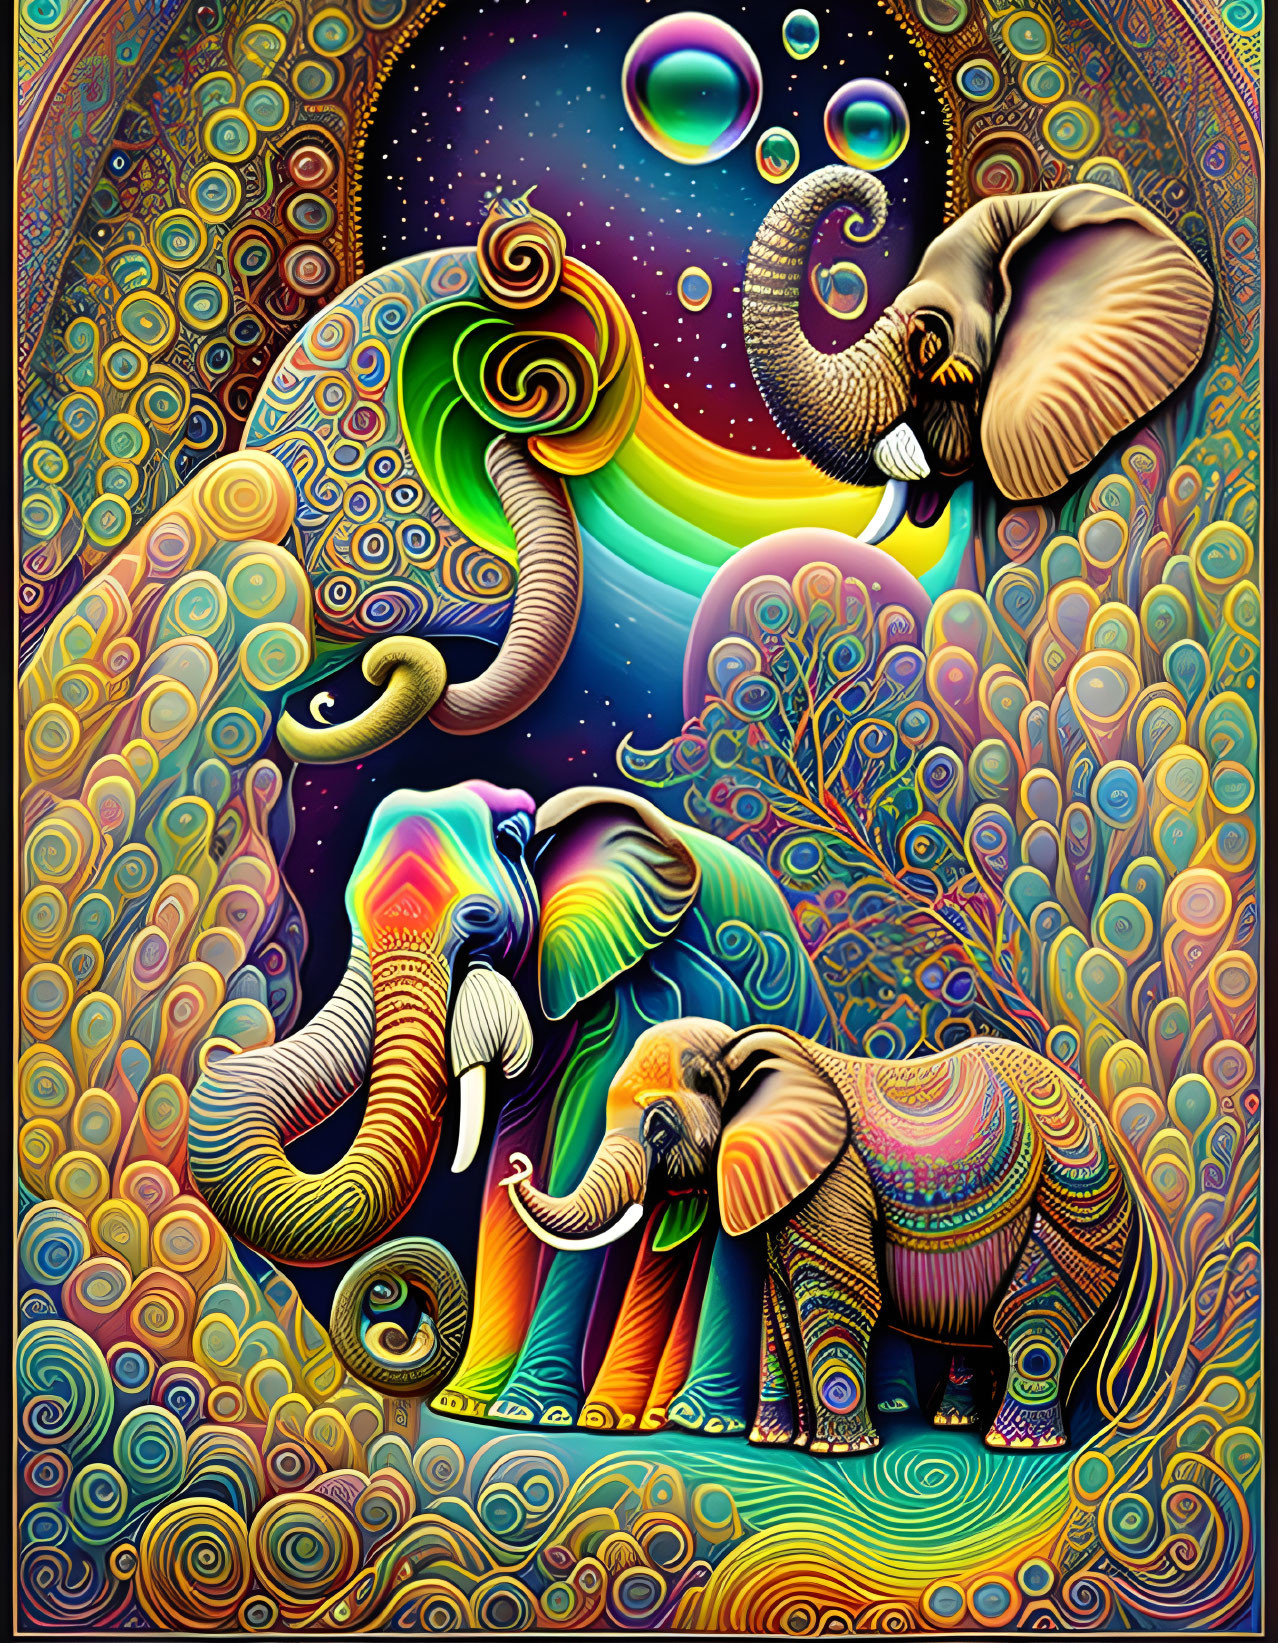 Regenerated elephants in a psychedelic world 